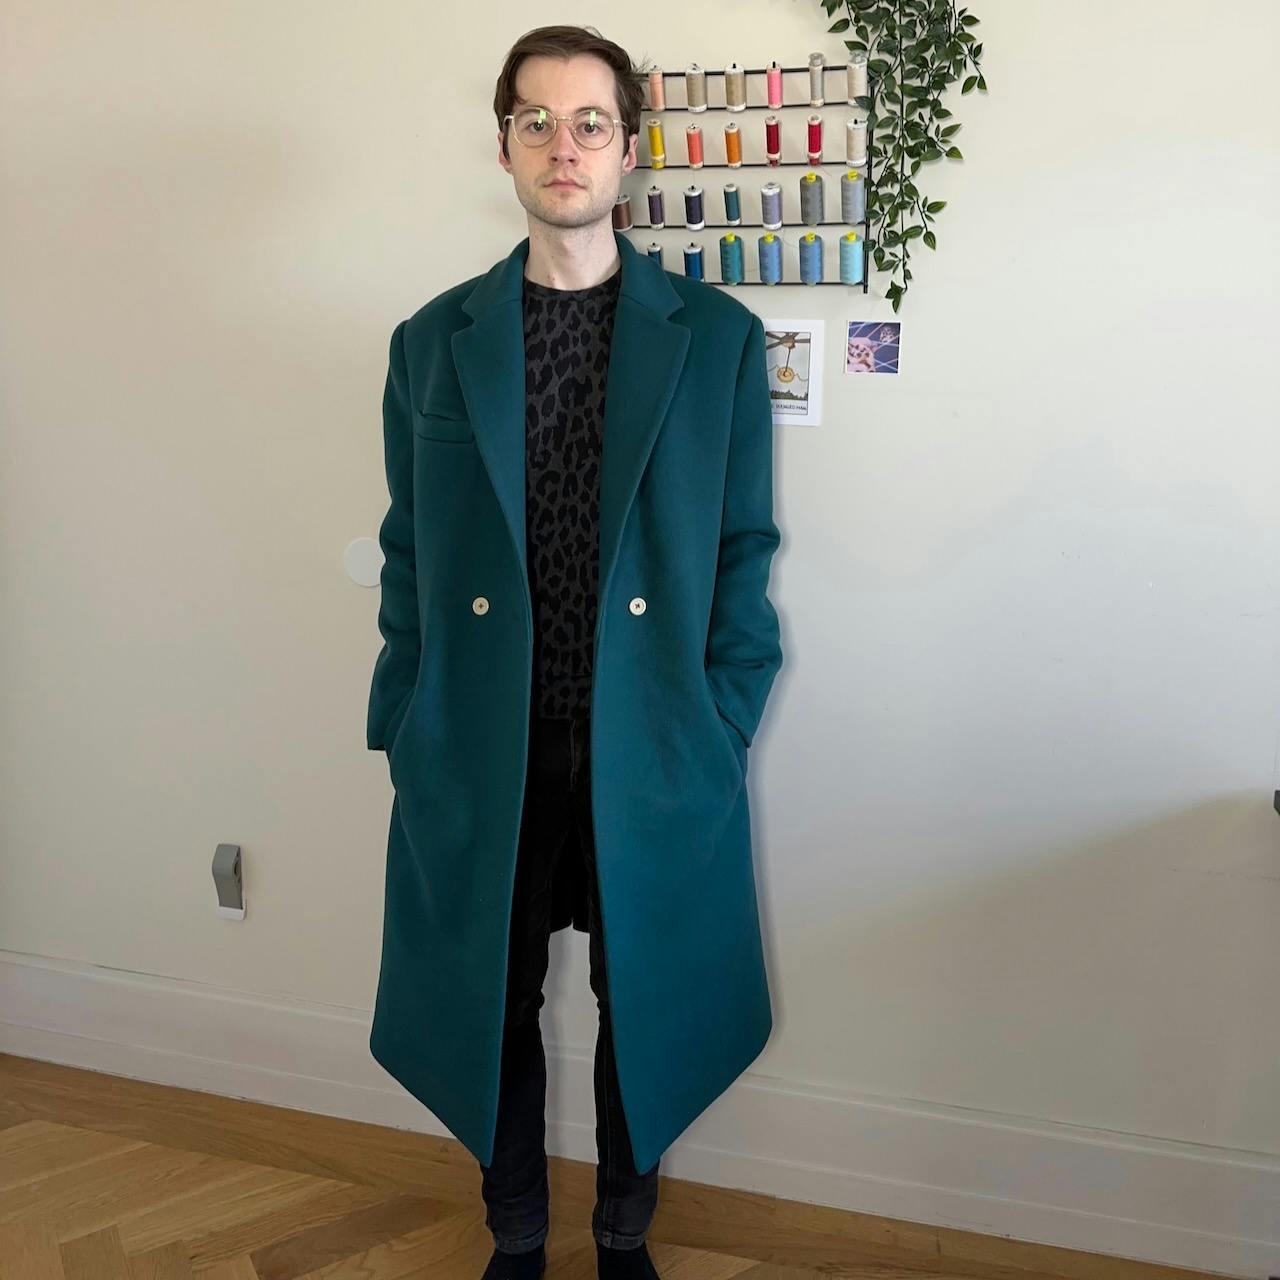 Me standing facing the camera straight-on wearing a structure blue-green wool coat with strong shoulders and a notched lapel. The float arches out from the waist down to the hem reaching my knees due to wearing it unbuttoned.